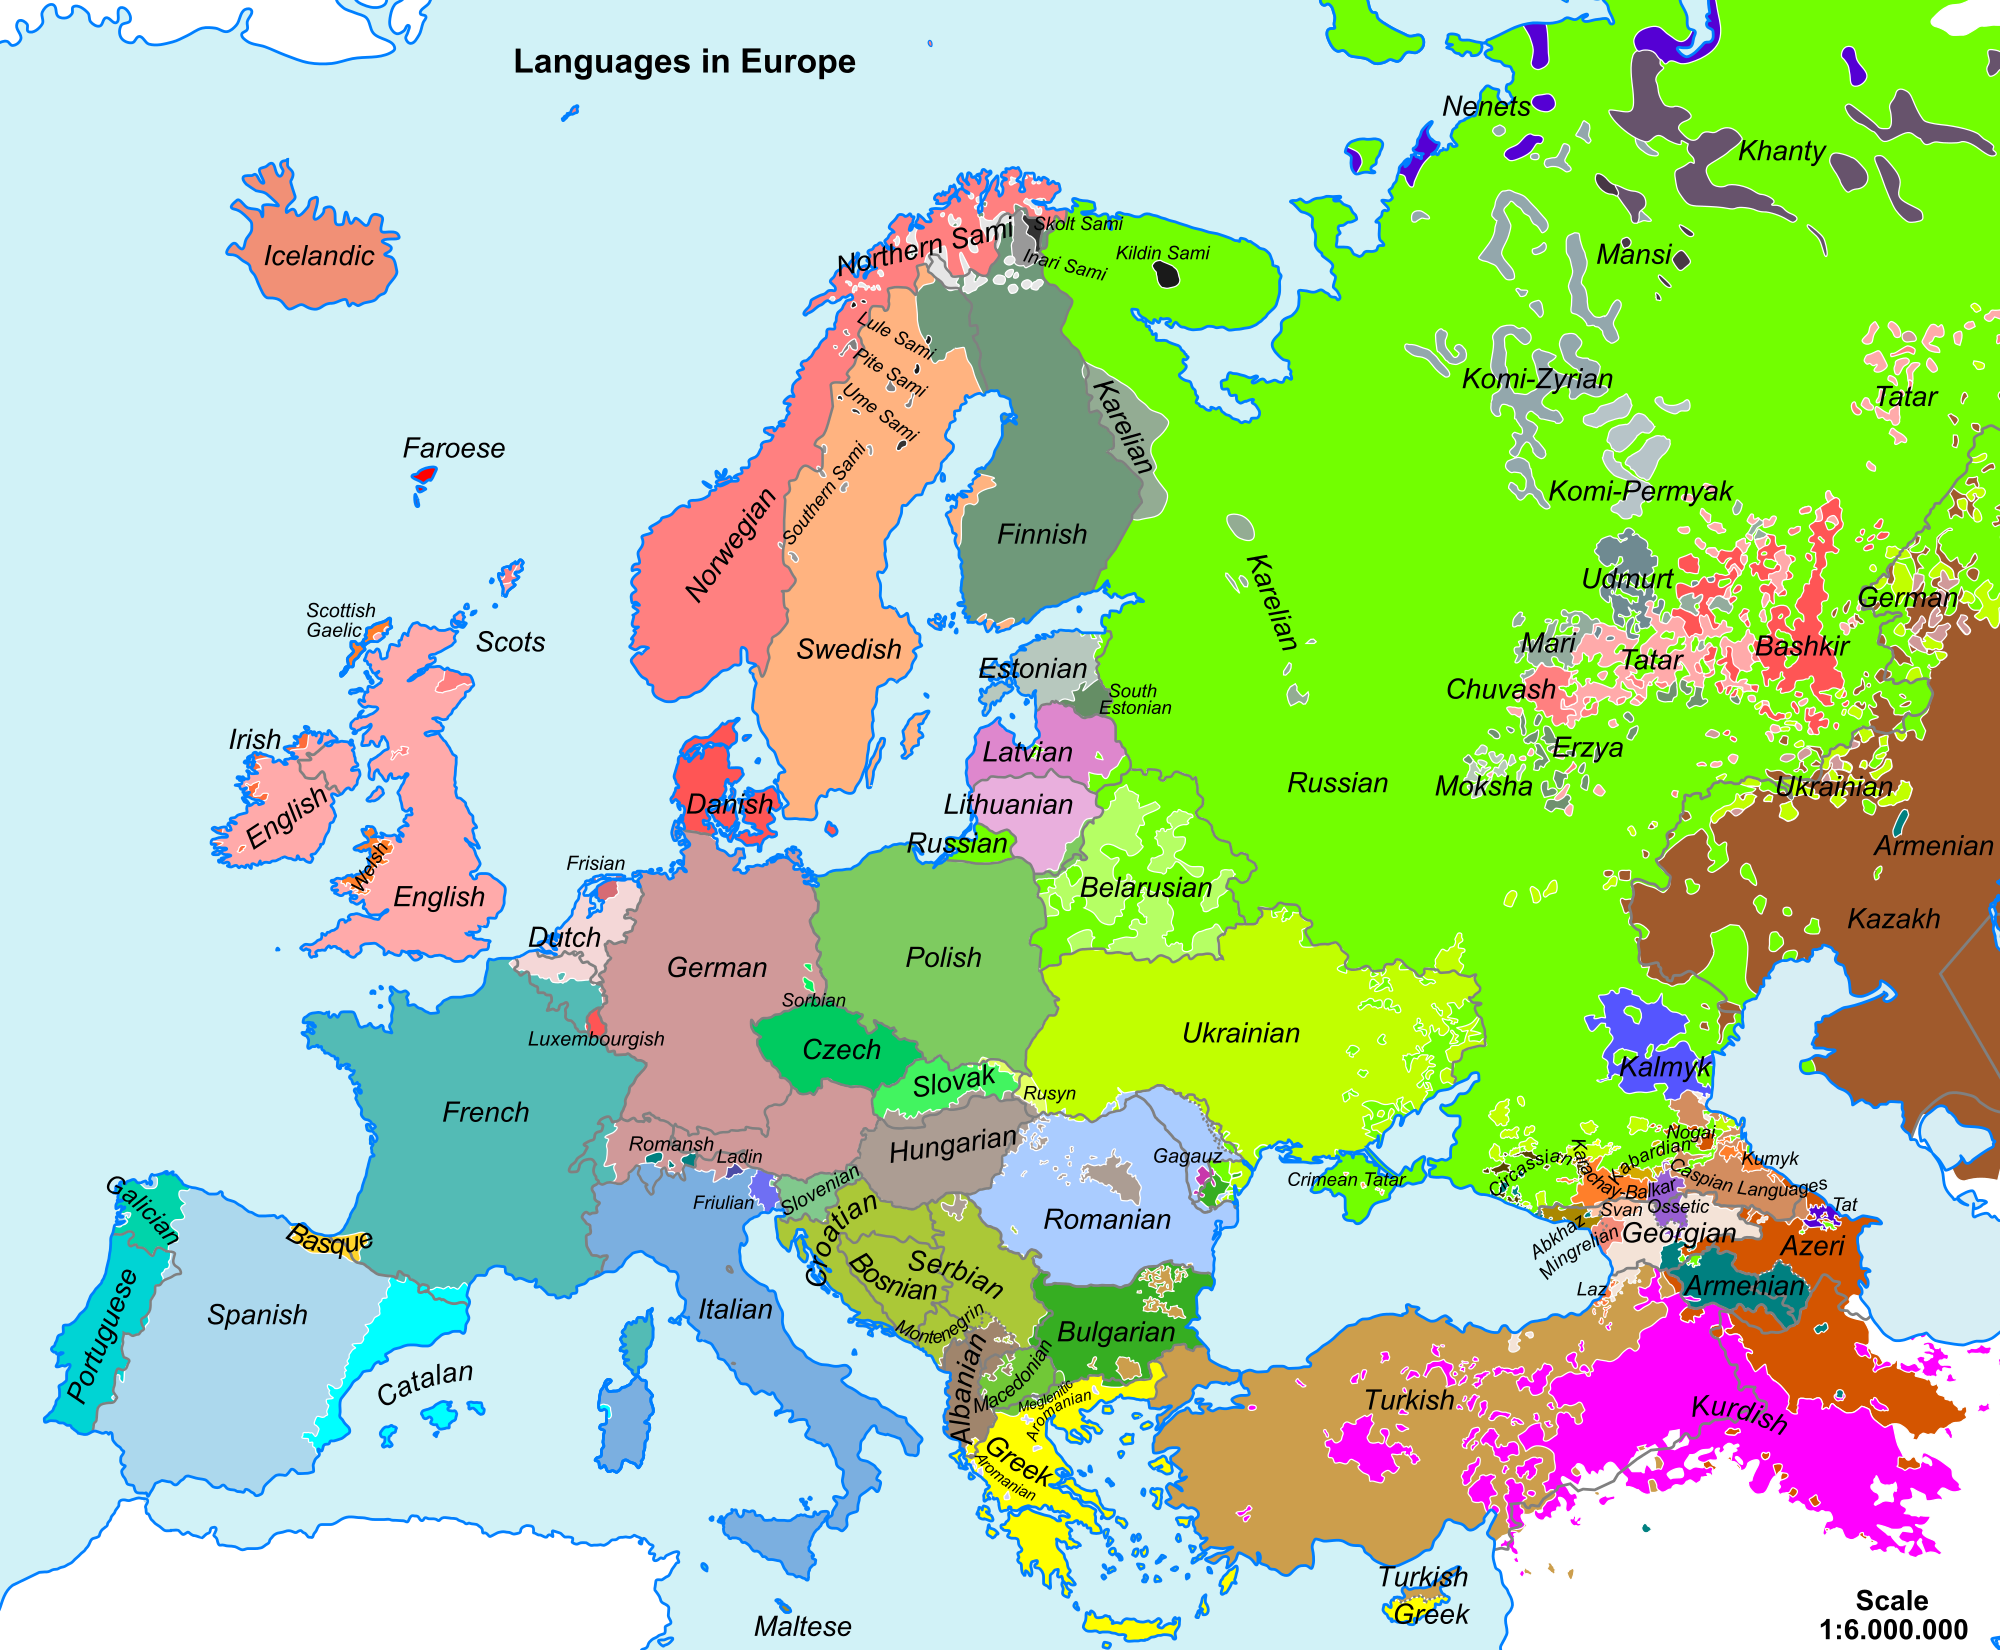 Simplified_Languages_of_Europe_map.svg